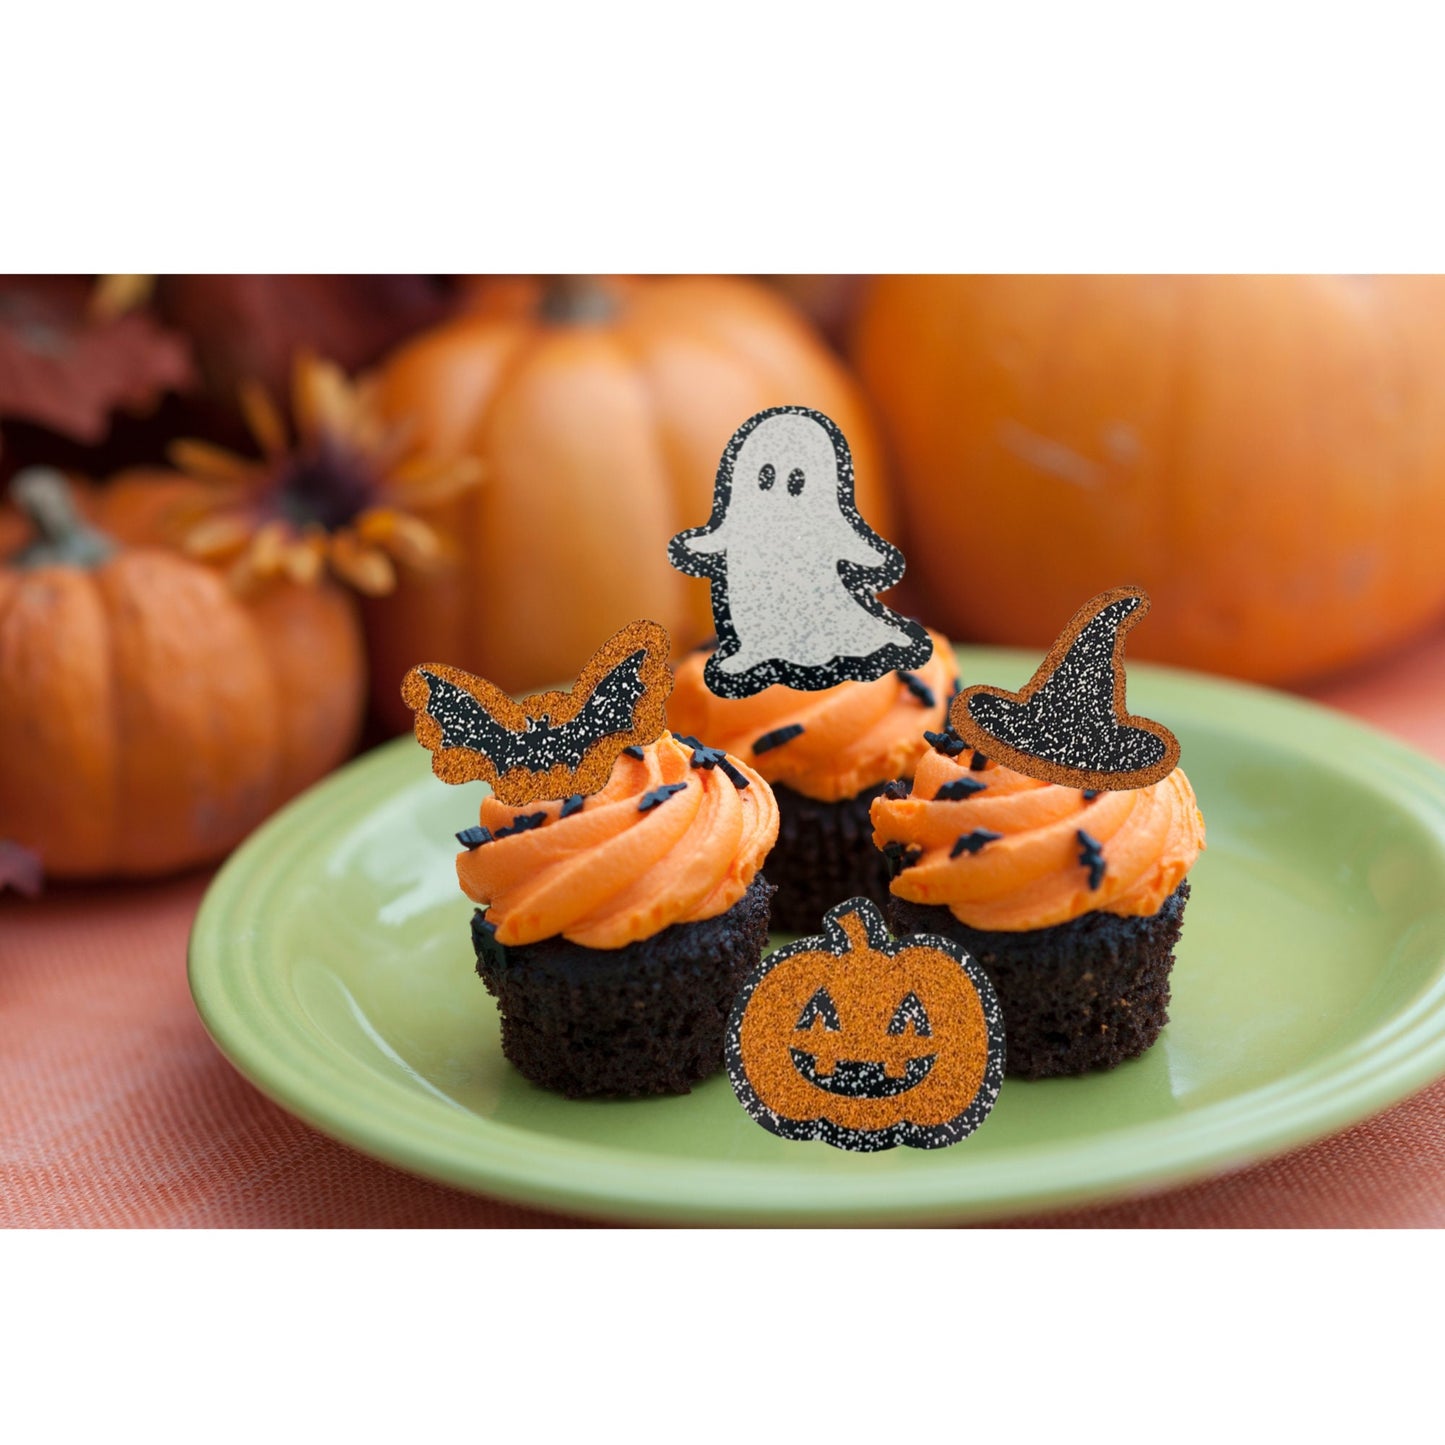 Set of 4 or 8 Halloween Cupcake Toppers, Spooky Party Fairy Cake Picks, Trick or Treat Kids Party Cake Decorations, Witch's Hat Cake Toppers